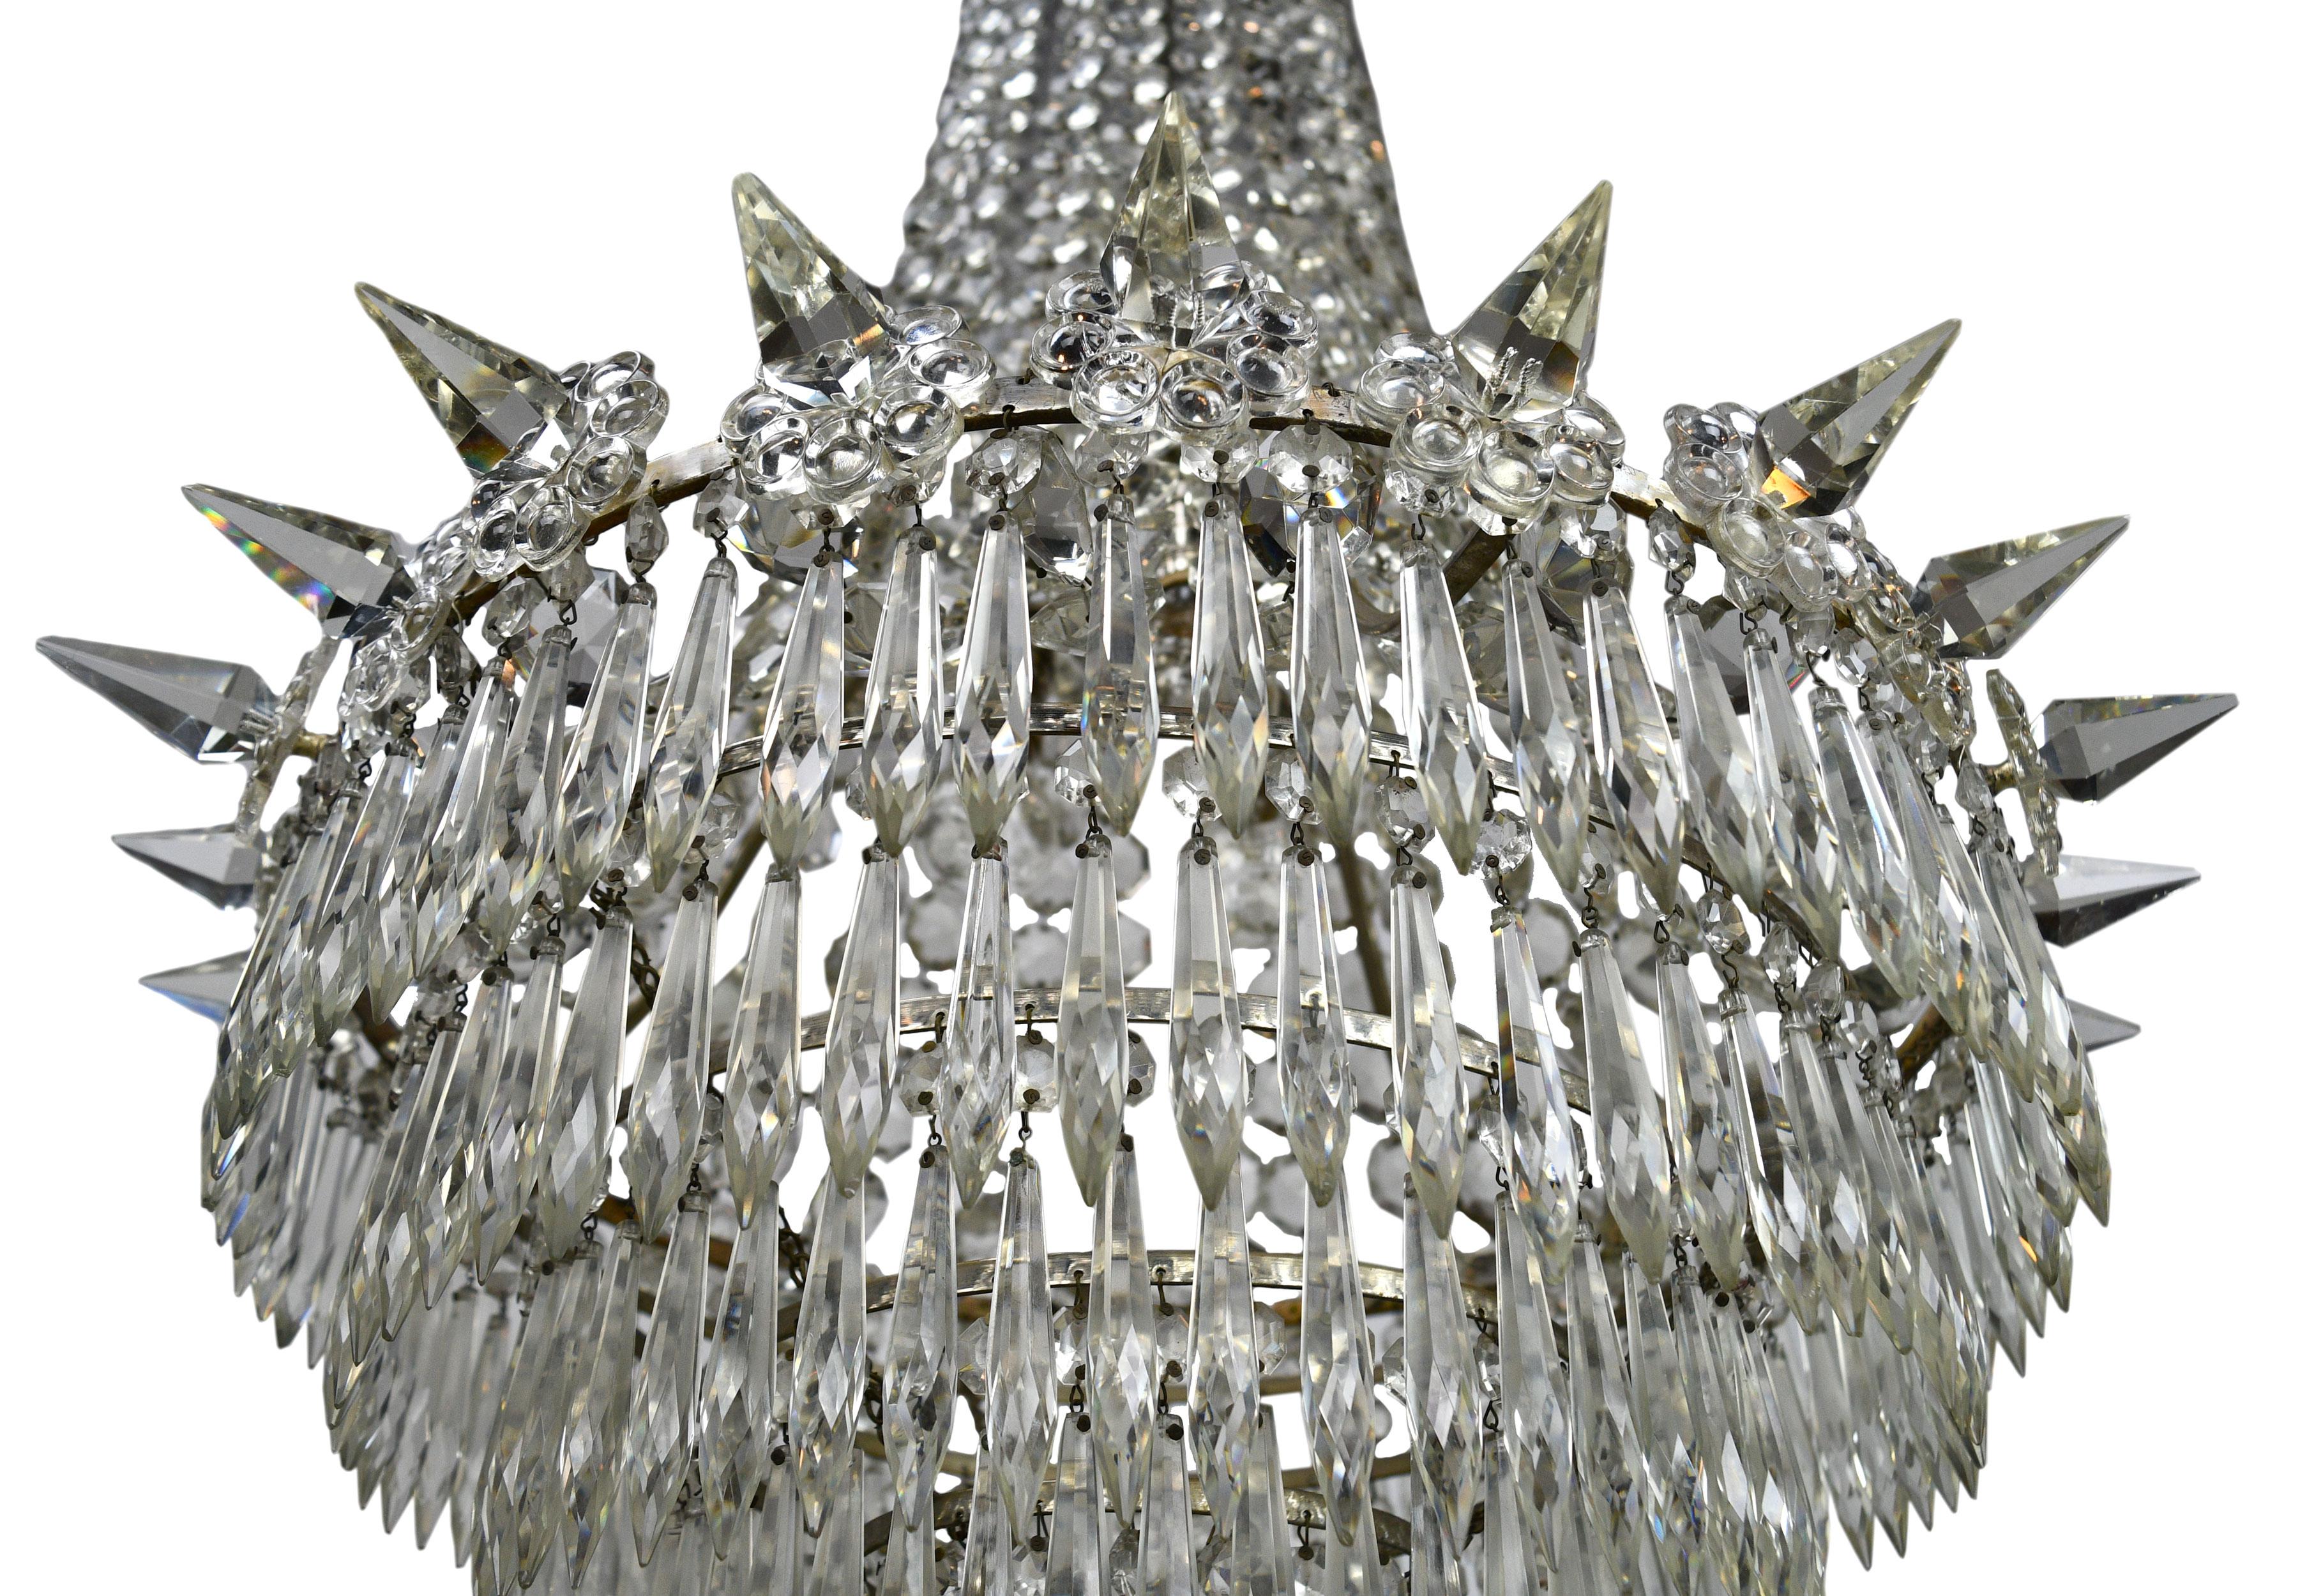 This stunning crystal chandelier features 6 rows of crystals and 24 uniquely shaped spikes adorning the circumference. The copious amount of individual crystals and crystal swag give this chandelier a wonderful golden glimmer when illuminated.